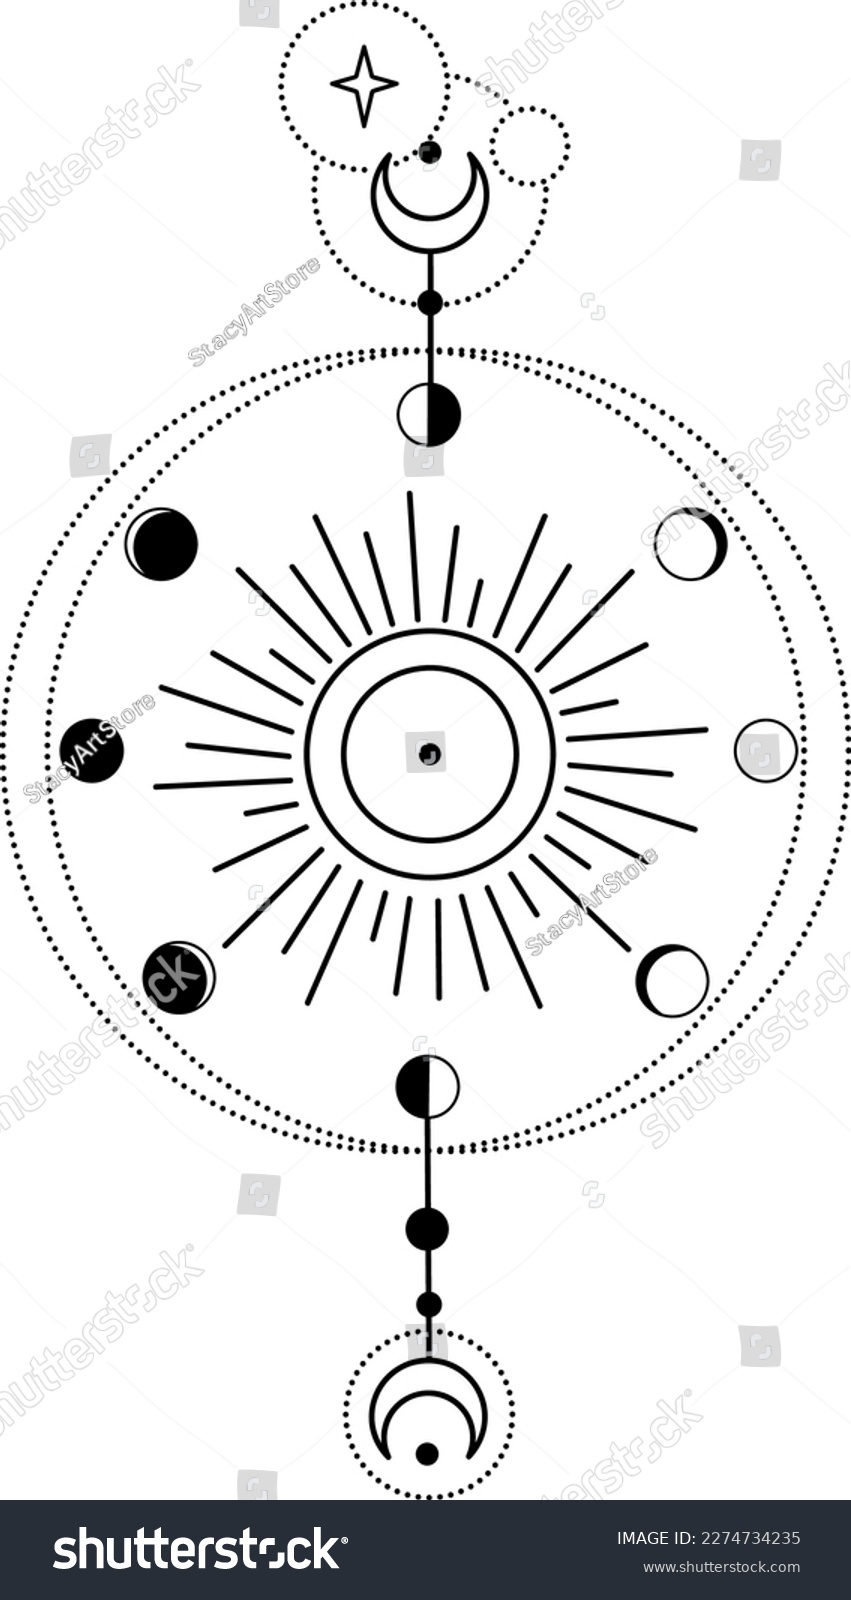 SVG of Bohemian Universe Illustration with Moon Phases, Sun, Stars and Rays. Astrology SVG Vector Clipart. Celestial, Mystical, Esoteric designs perfect for Printing. T-shirt, Mugs Cut File. Universe Art svg